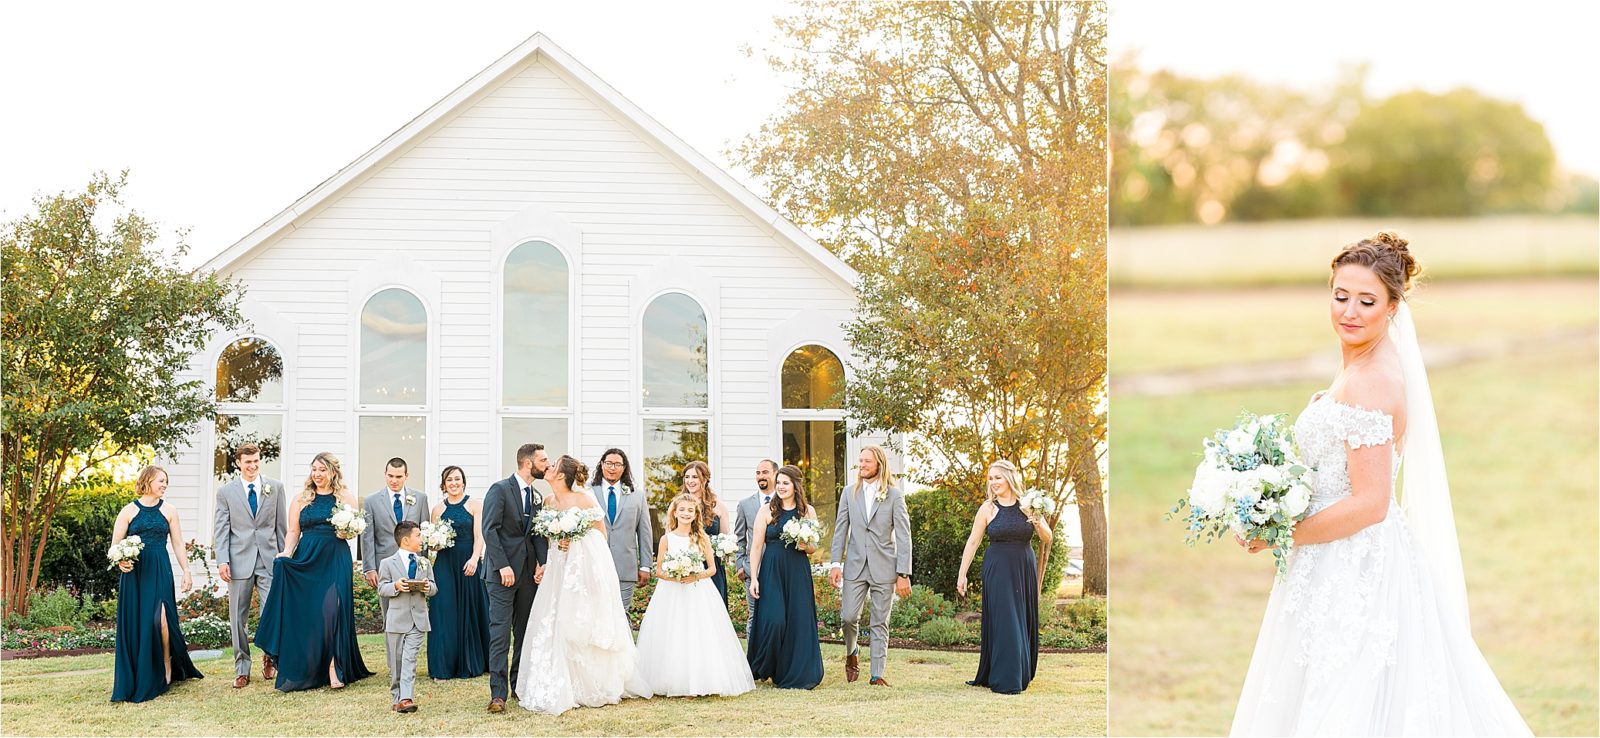 A wedding party walks in front of a white wedding chapel as the newlywed couple shares a kiss at Rustic Grace Estate 